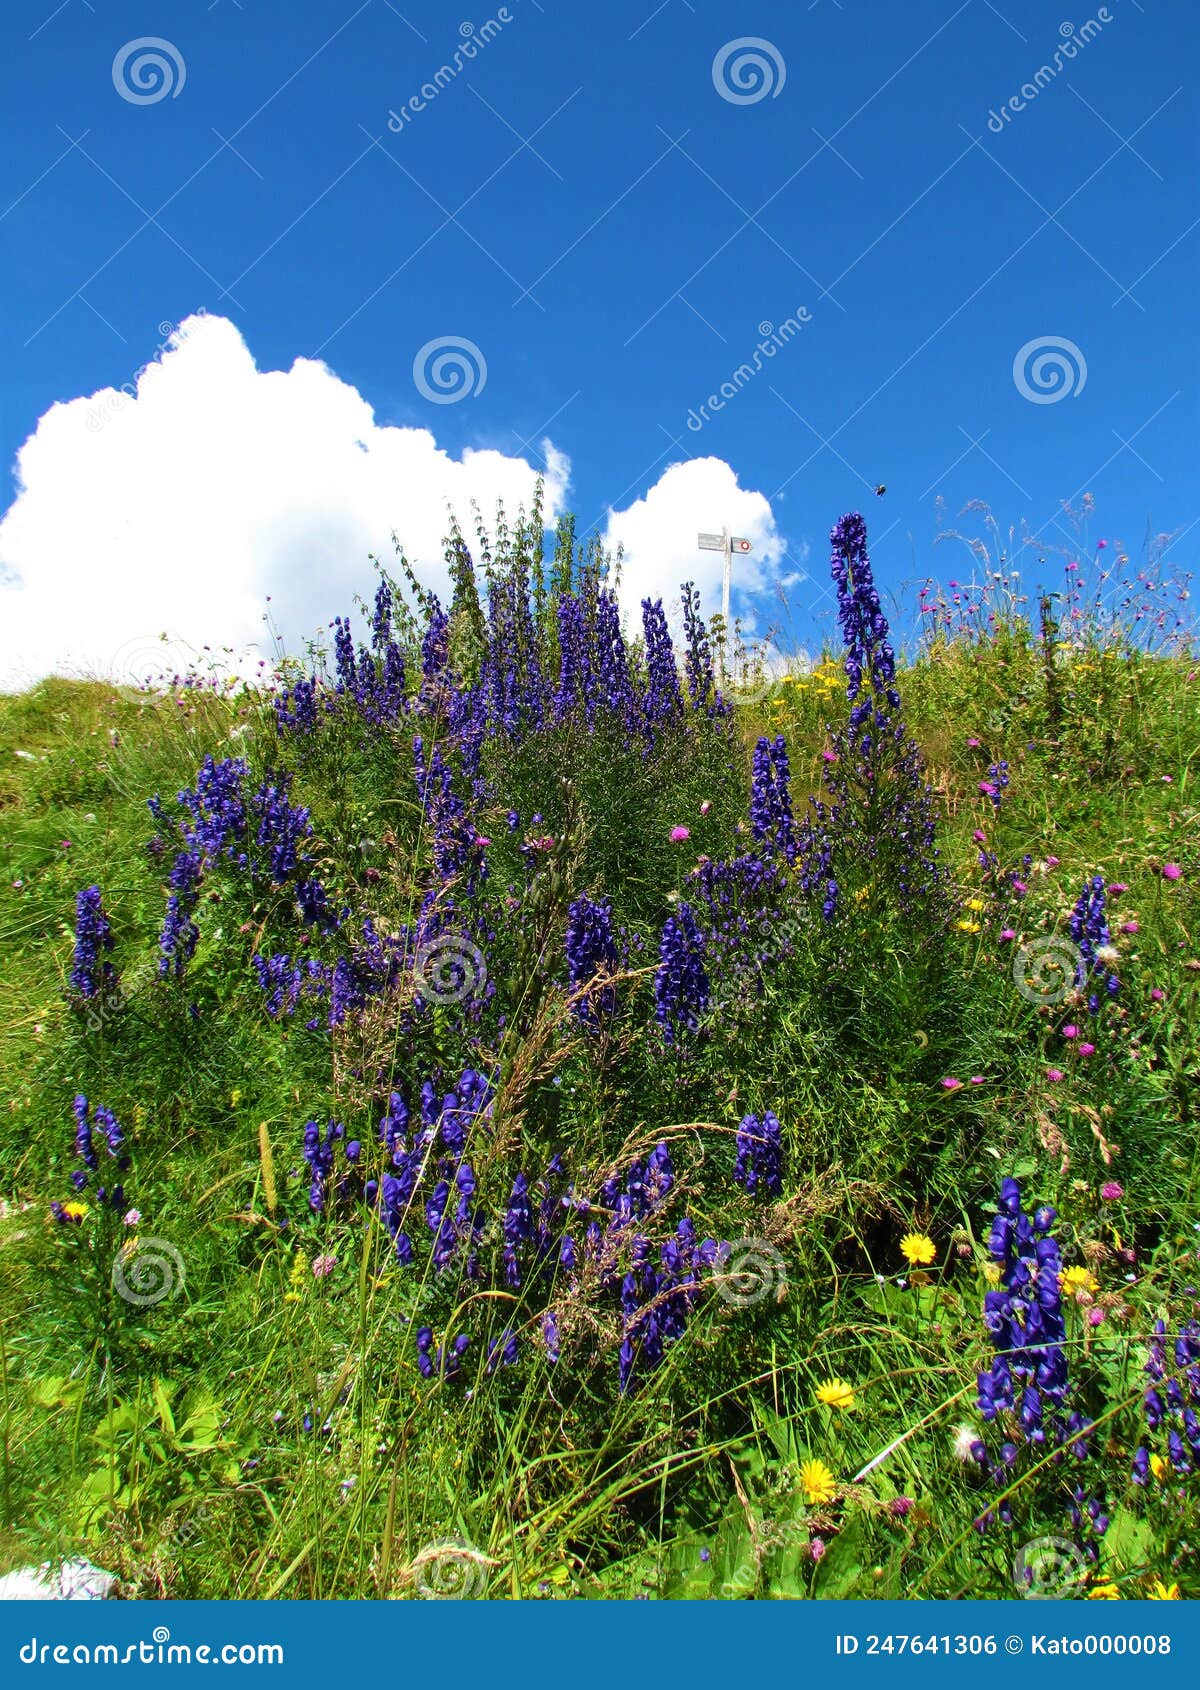 Blue Monk S-hood (Aconitum Napellus) Flowers in Julian Alps and